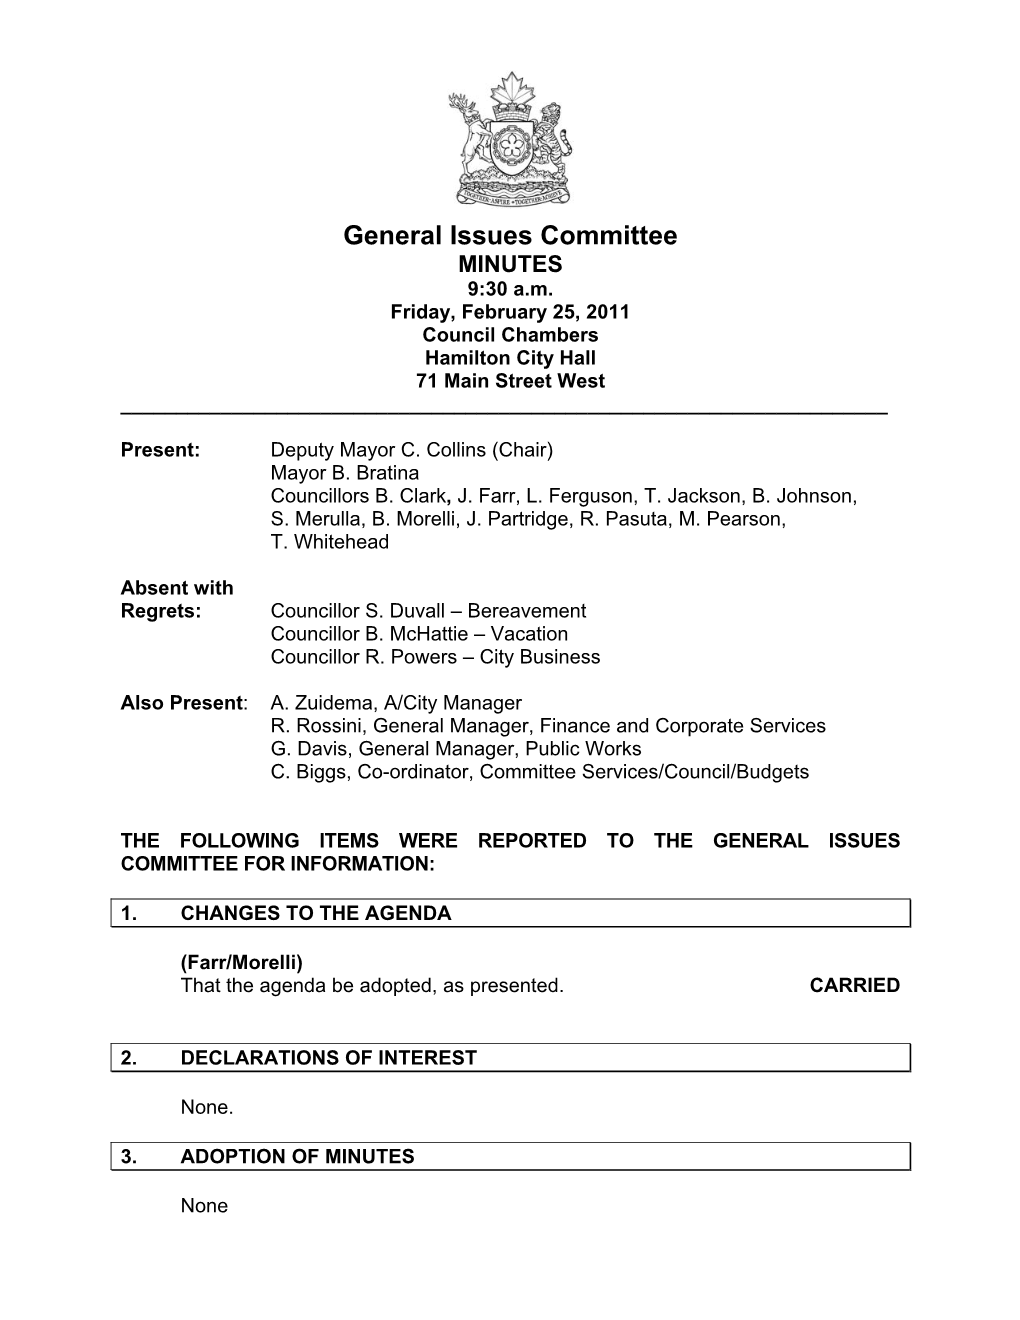 General Issues Committee MINUTES 9:30 A.M. Friday, February 25, 2011 Council Chambers Hamilton City Hall 71 Main Street West ______